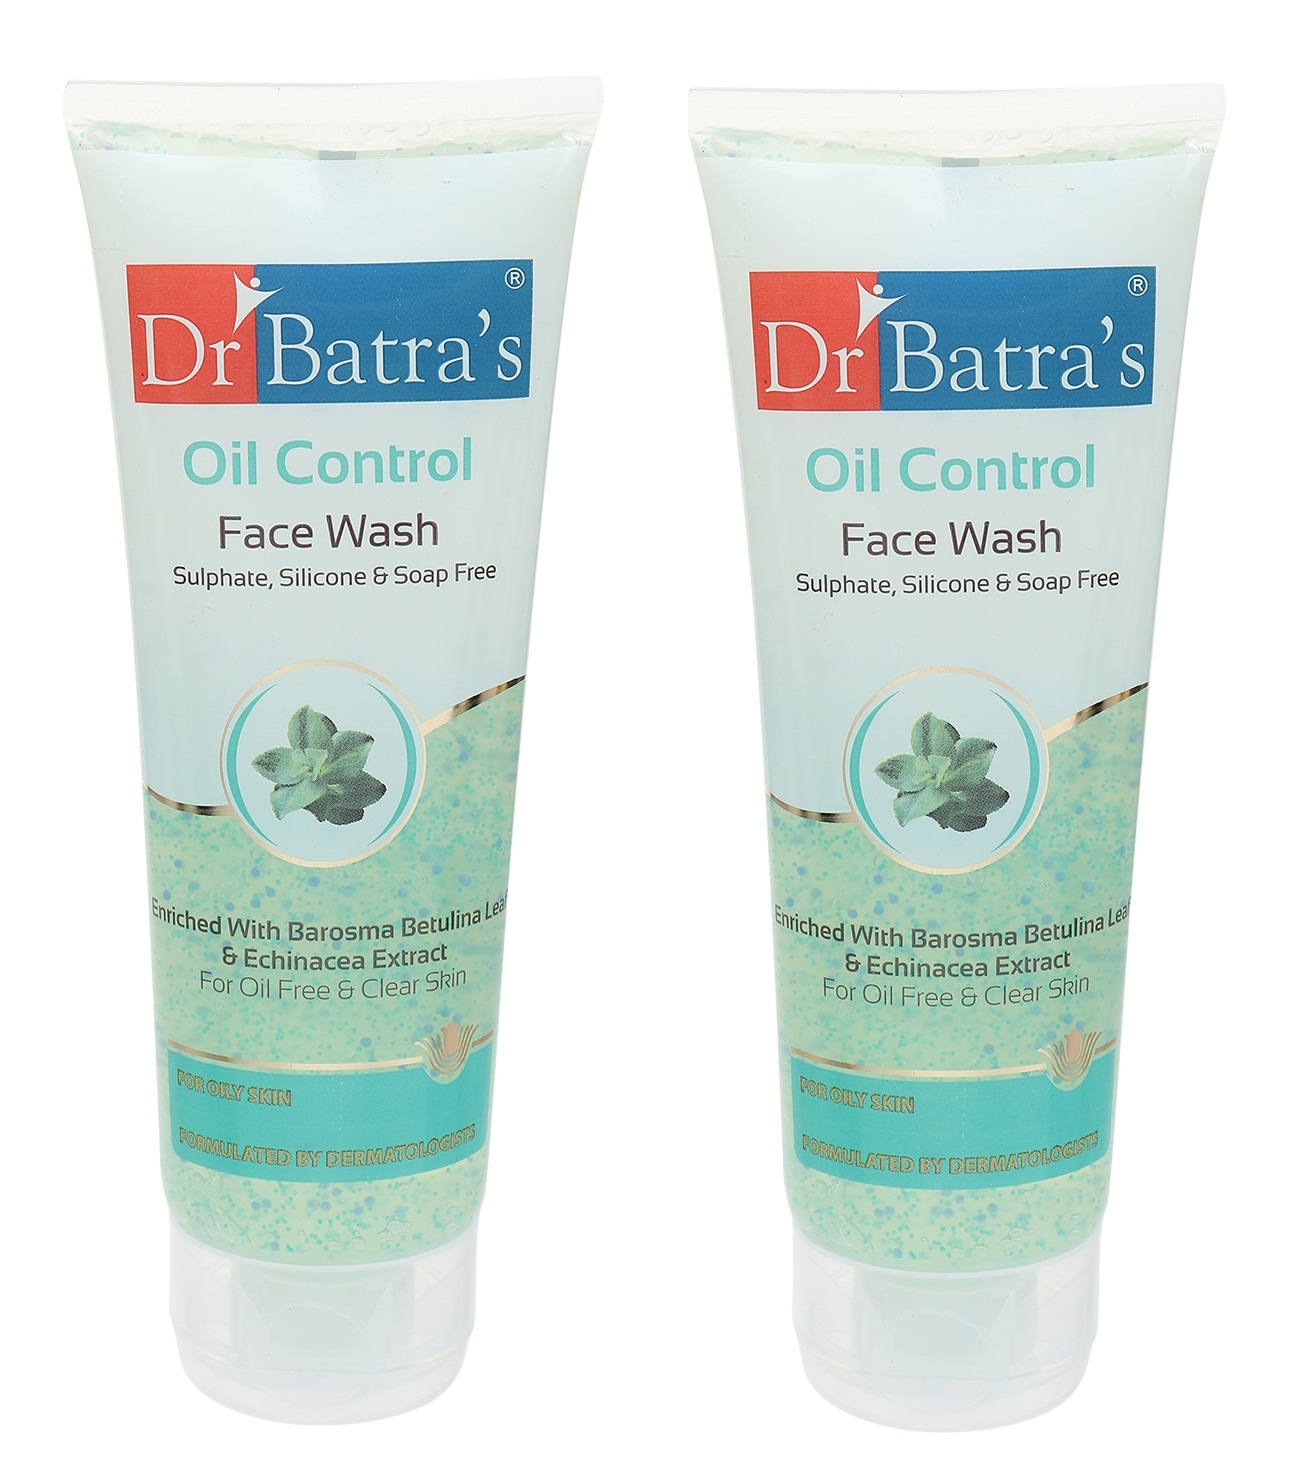 Dr Batra's | Dr Batra's Oil Control Face Wash Sulphate, Silicone & Soap Free Enriched With Barosma Betulina Leaf & Echinancea Extract For Oil Free & Clear Skin - 100 gm (Pack of 2)